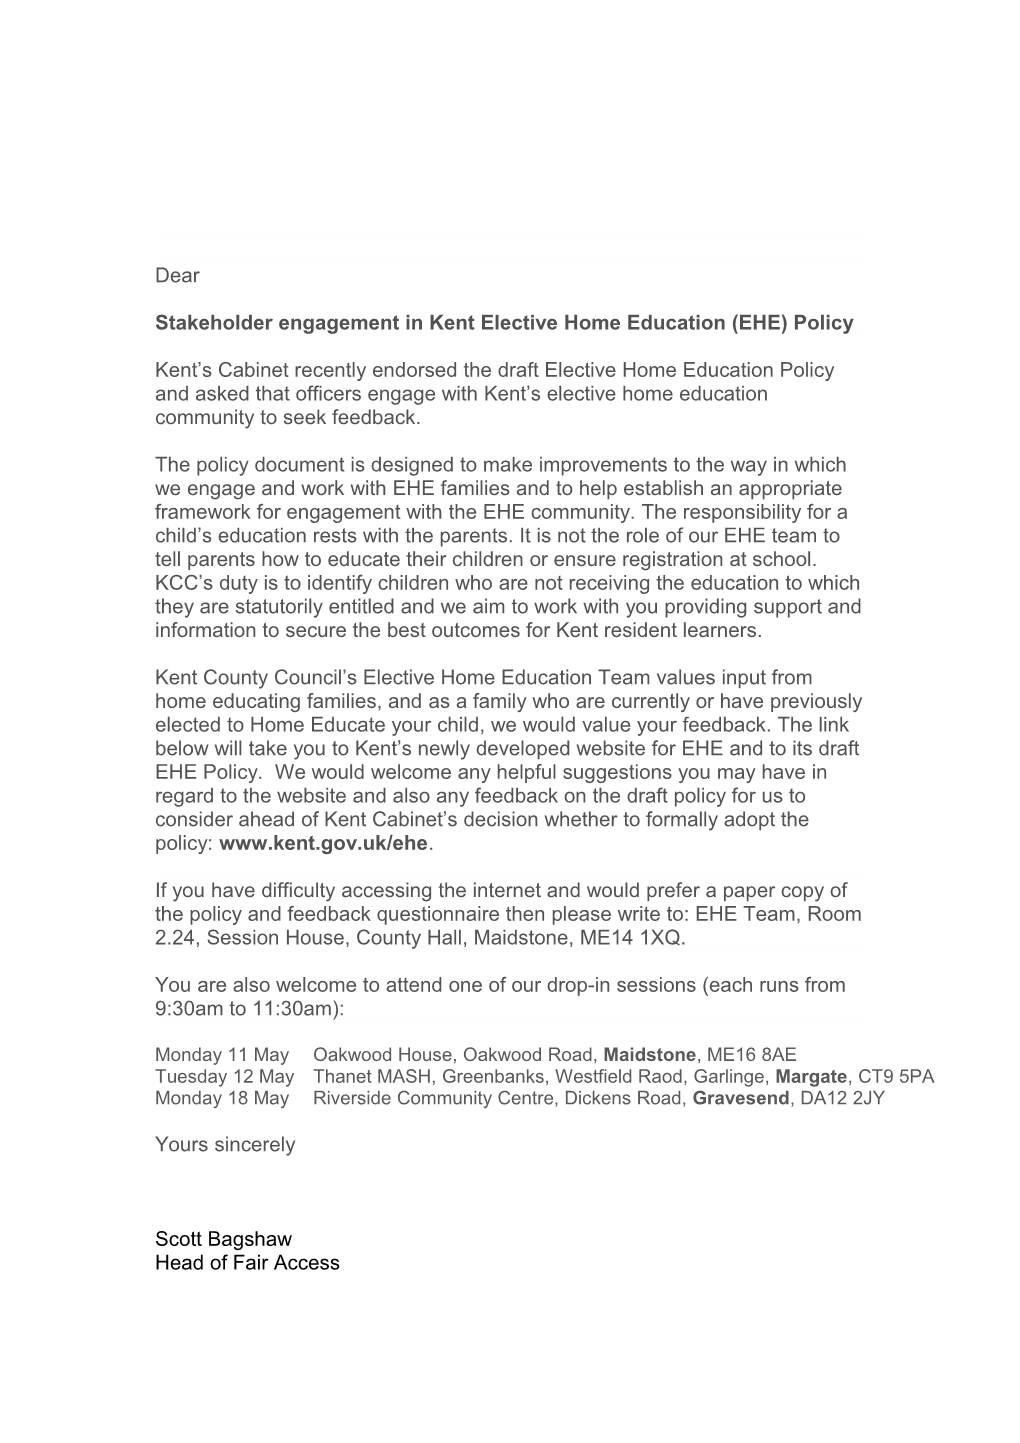 The Local Authority Has Made Some Changes and Recently Compiled Draft Elective Home Education